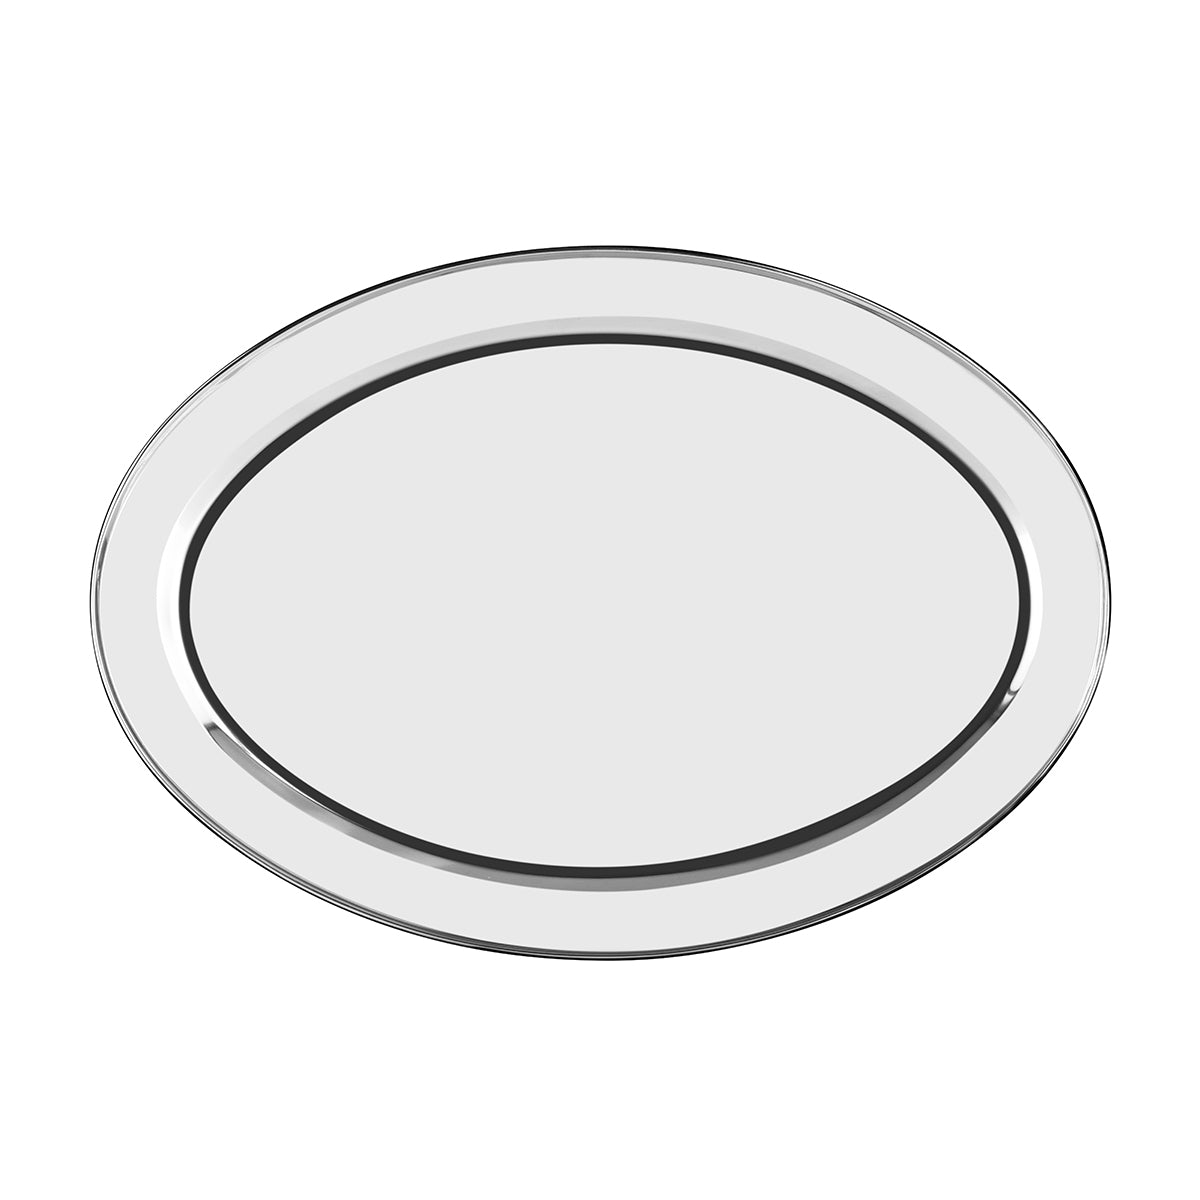 70724 Chef Inox Oval Platter Rolled Edge Stainless Steel 600x478mm Tomkin Australia Hospitality Supplies